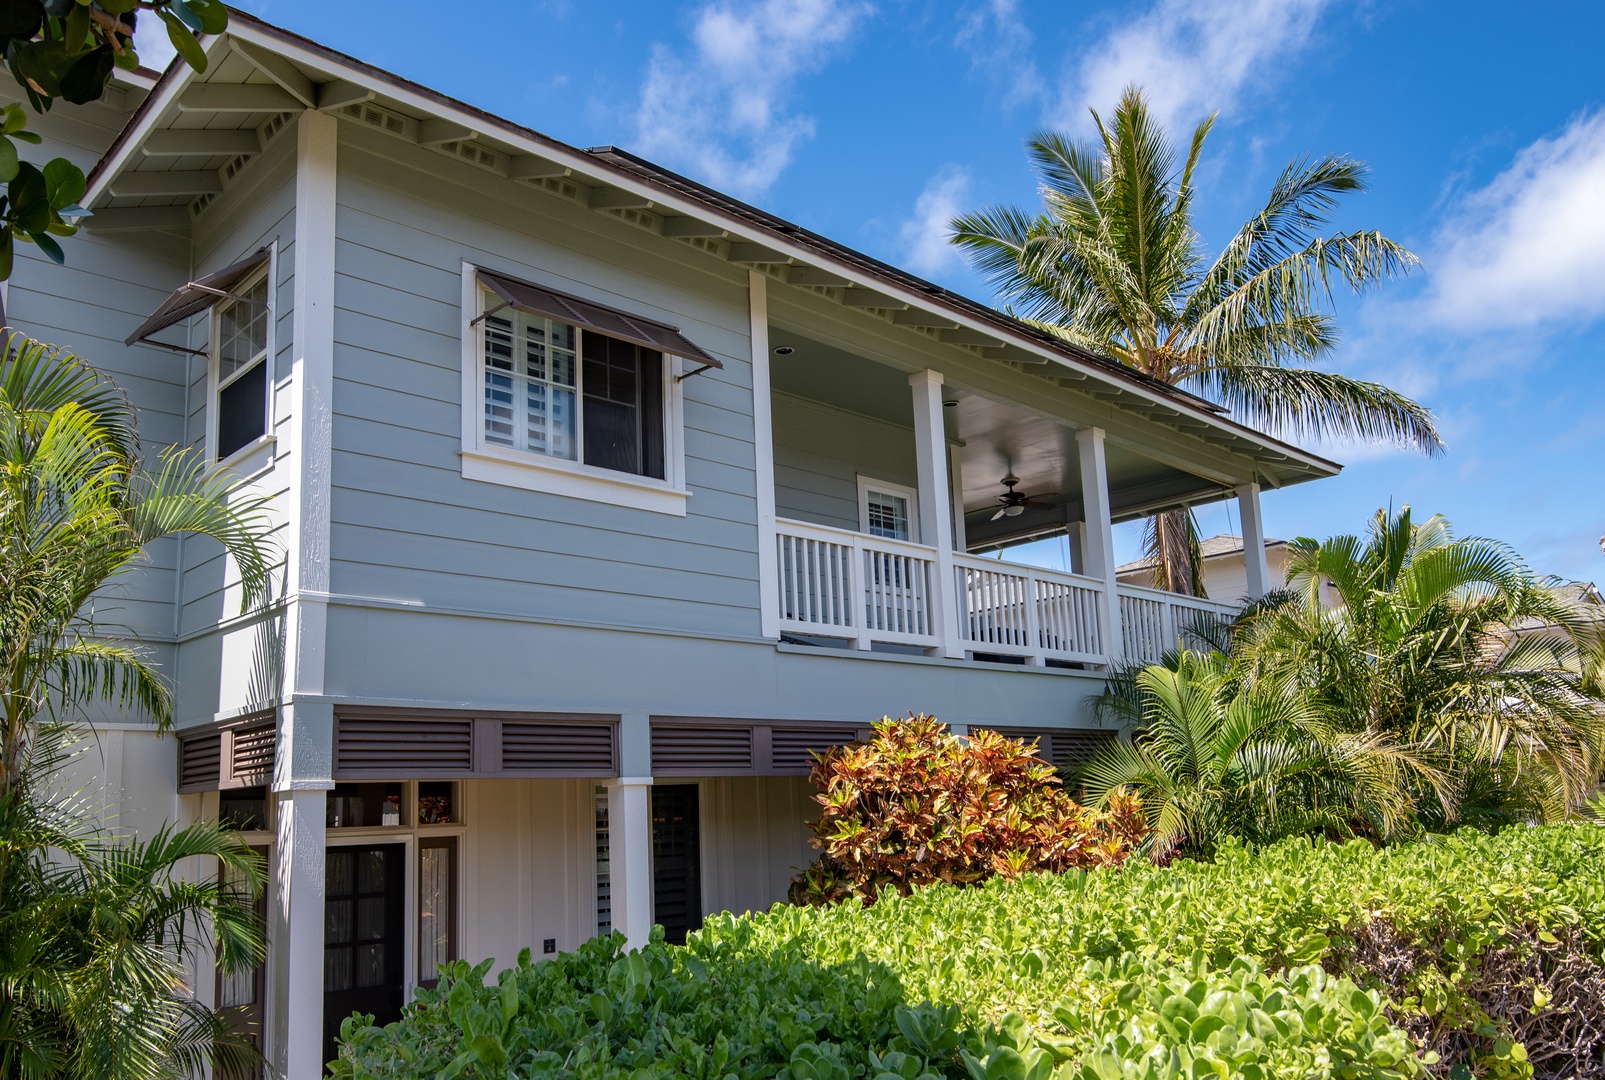 Kapolei Vacation Rentals, Coconut Plantation 1200-4 - Views of the private lanais and tropical landscaping.